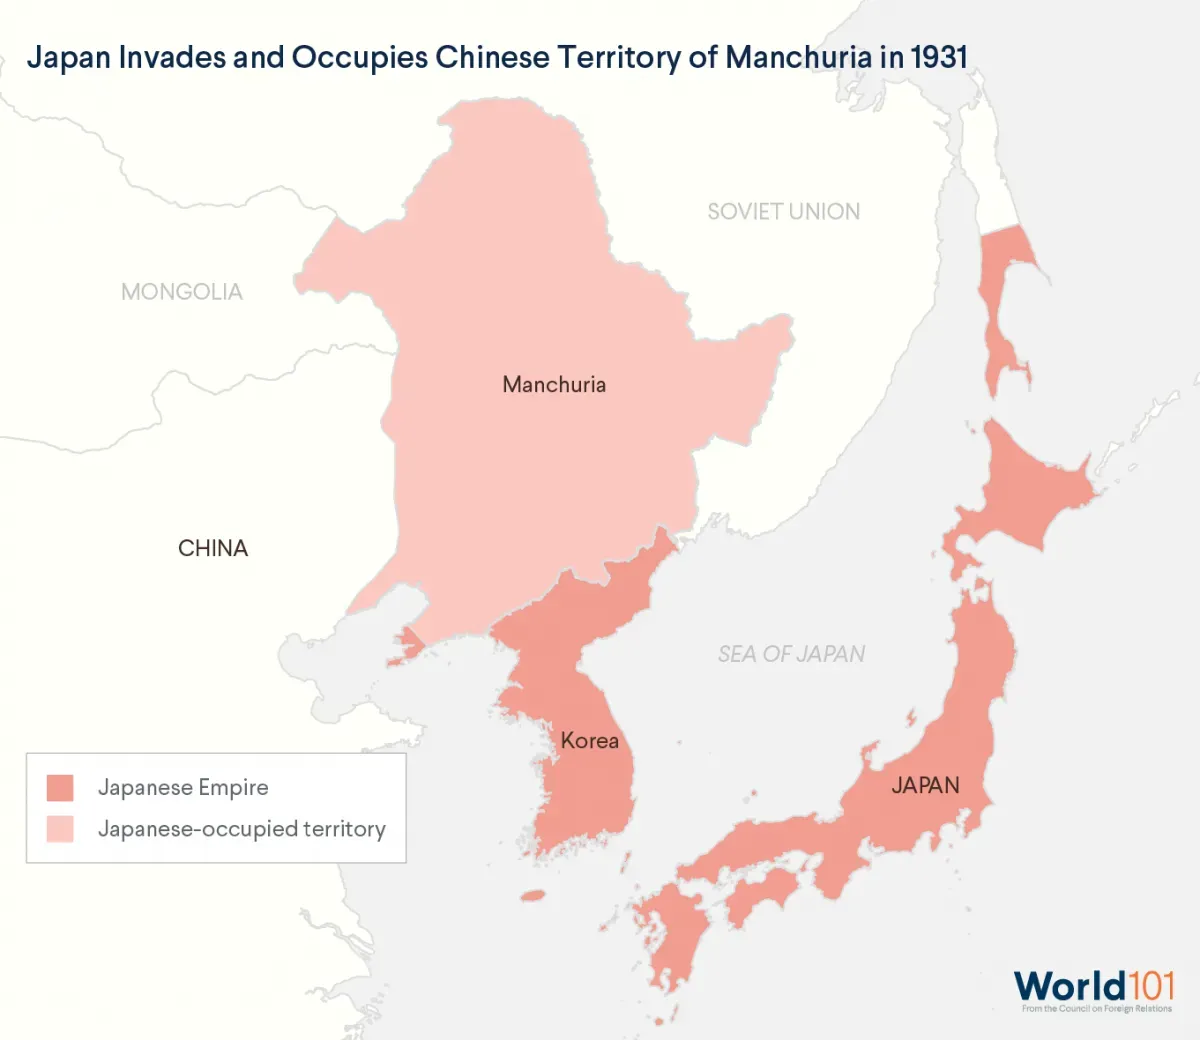 Map of the Japanese Empire and the Chinese territory Manchuria it occupied in 1931. For more info contact us at world101@cfr.org.